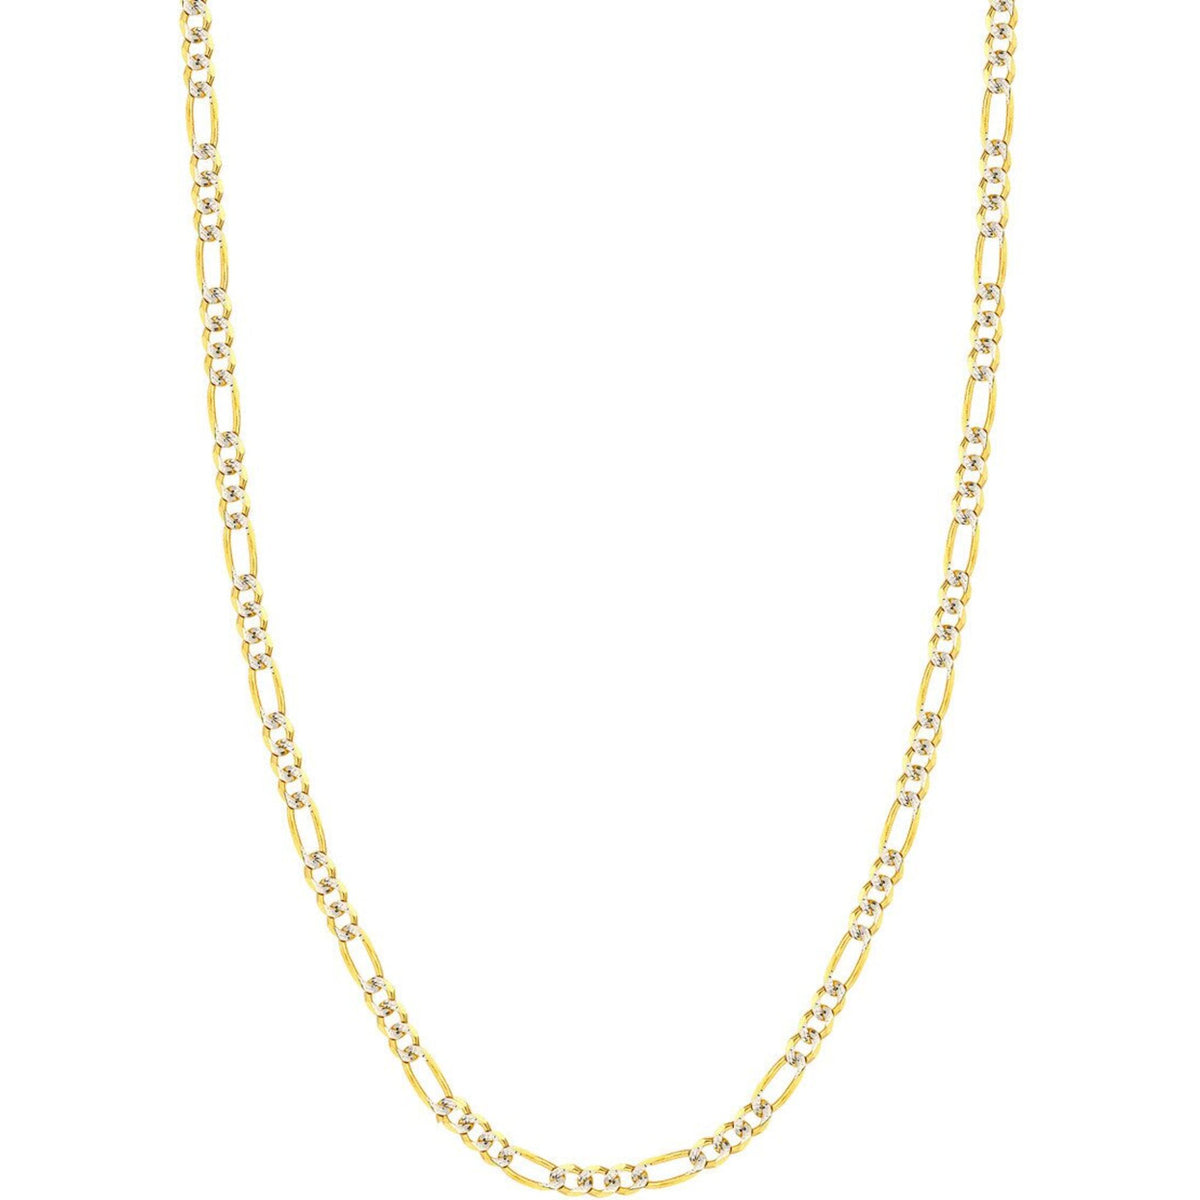 Olas d'Oro 24" Necklace - 14K Yellow/White Gold 4.75mm Two-Tone Pave Figaro Chain with Lobster Lock